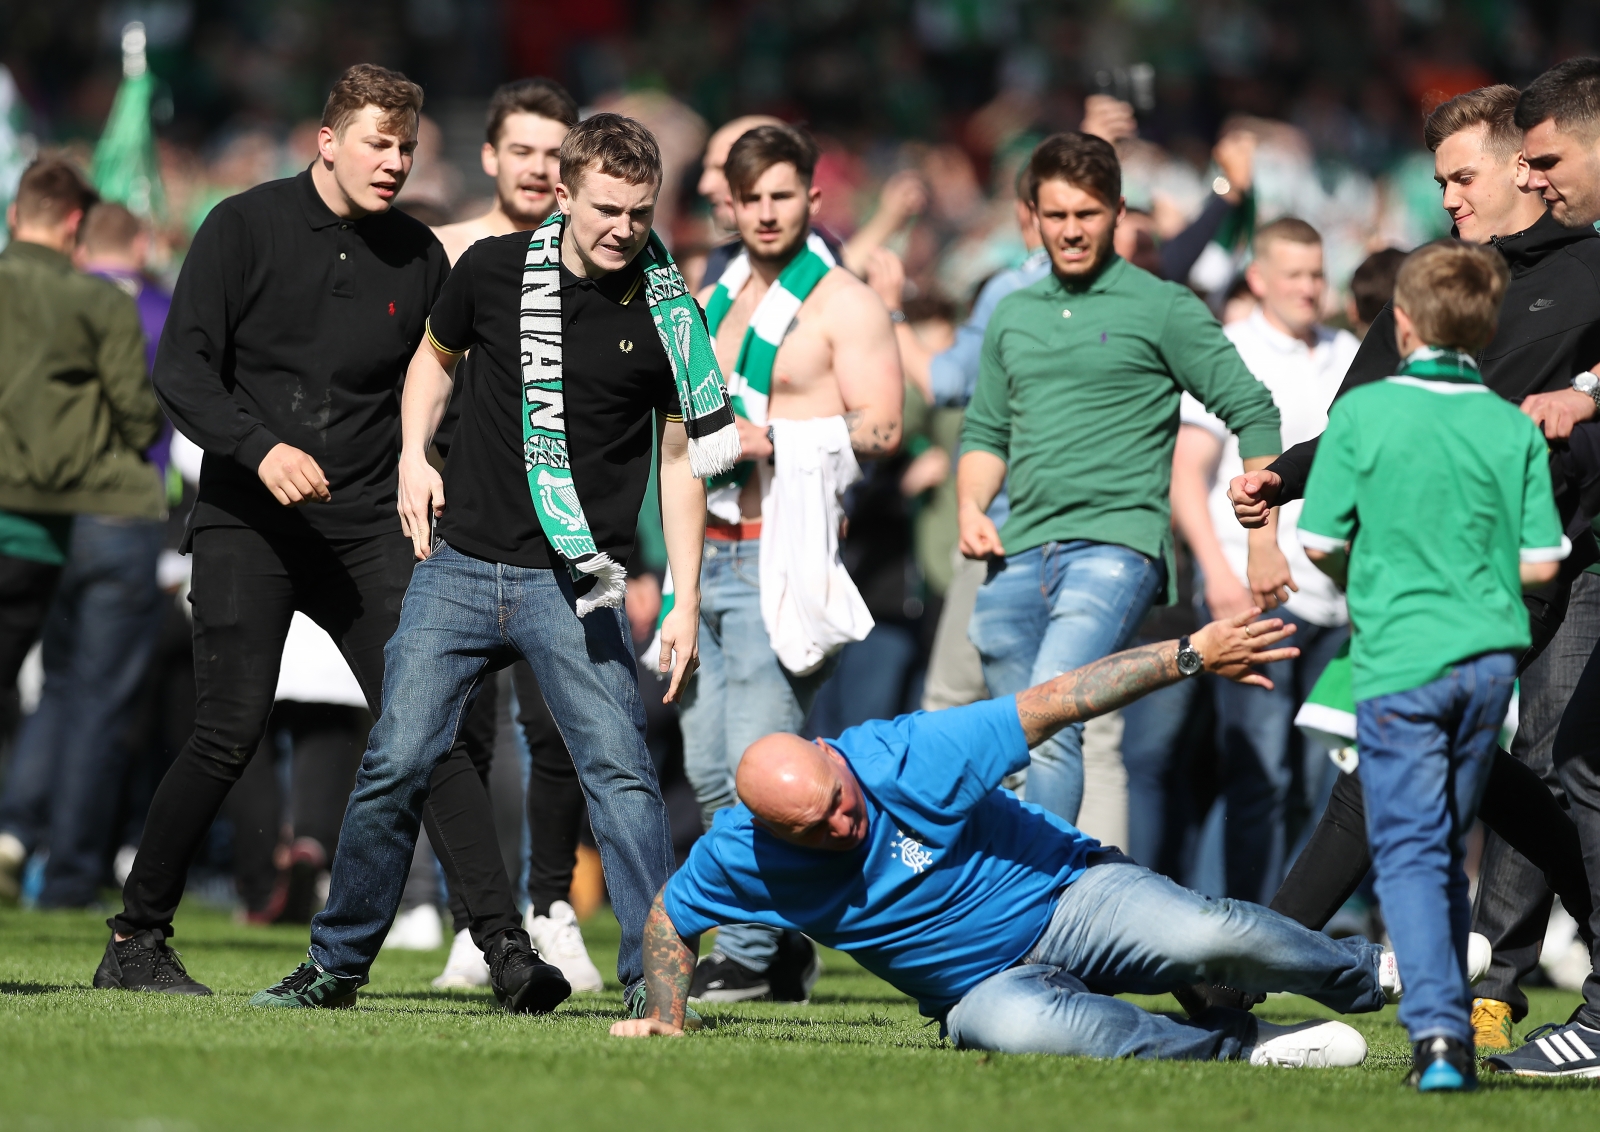 Scottish cup final pitch invasion